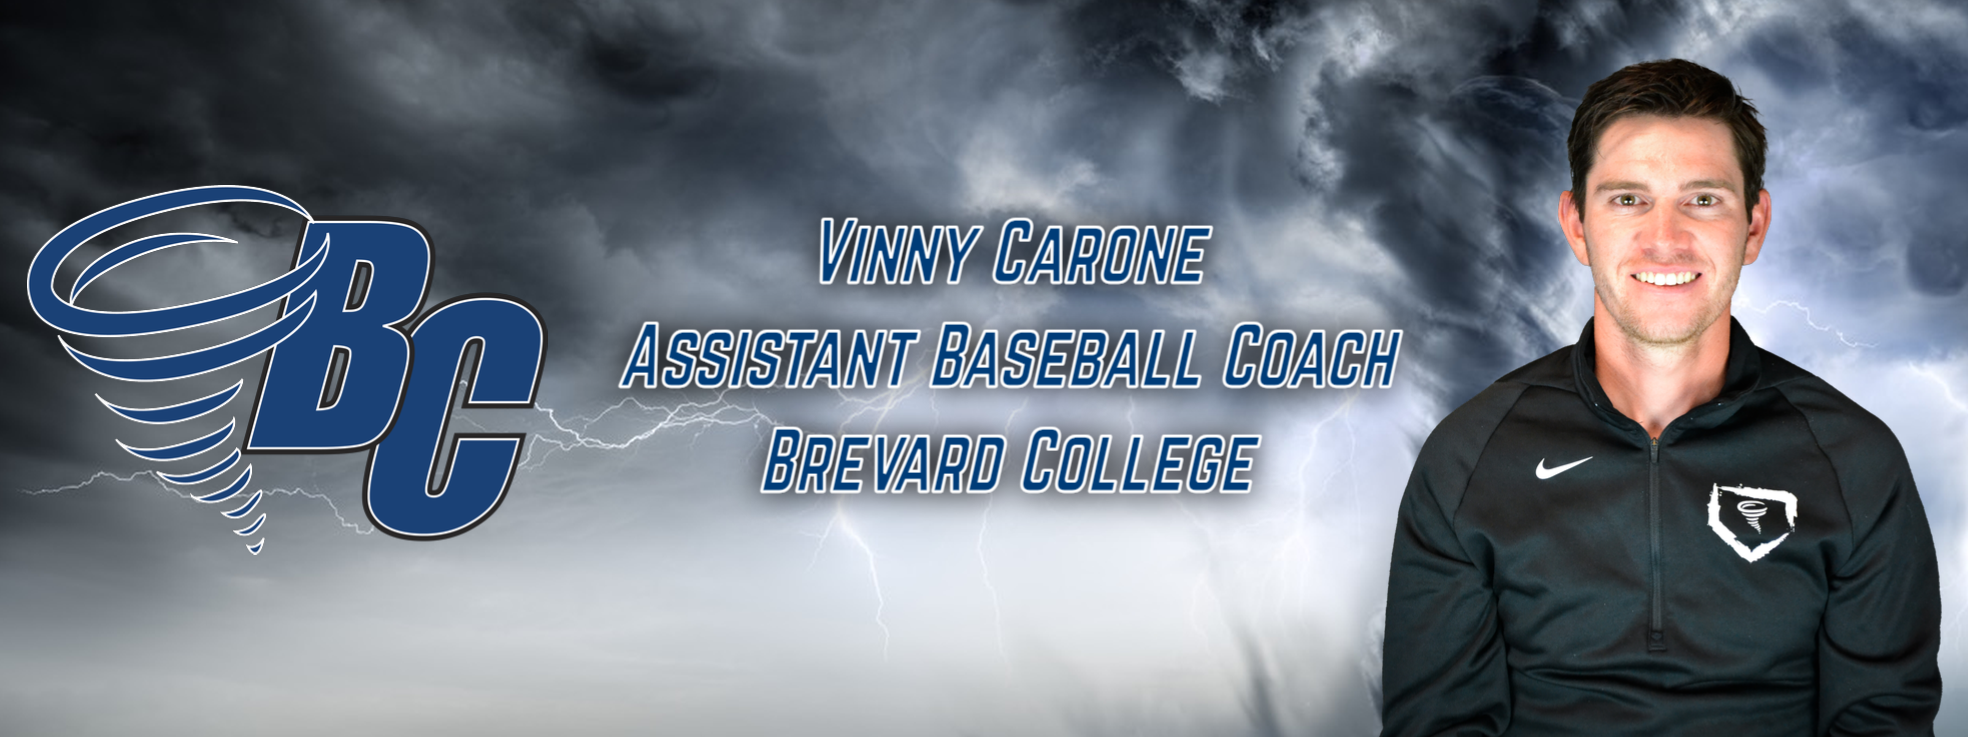 Carone Named Assistant Baseball Coach at Brevard College